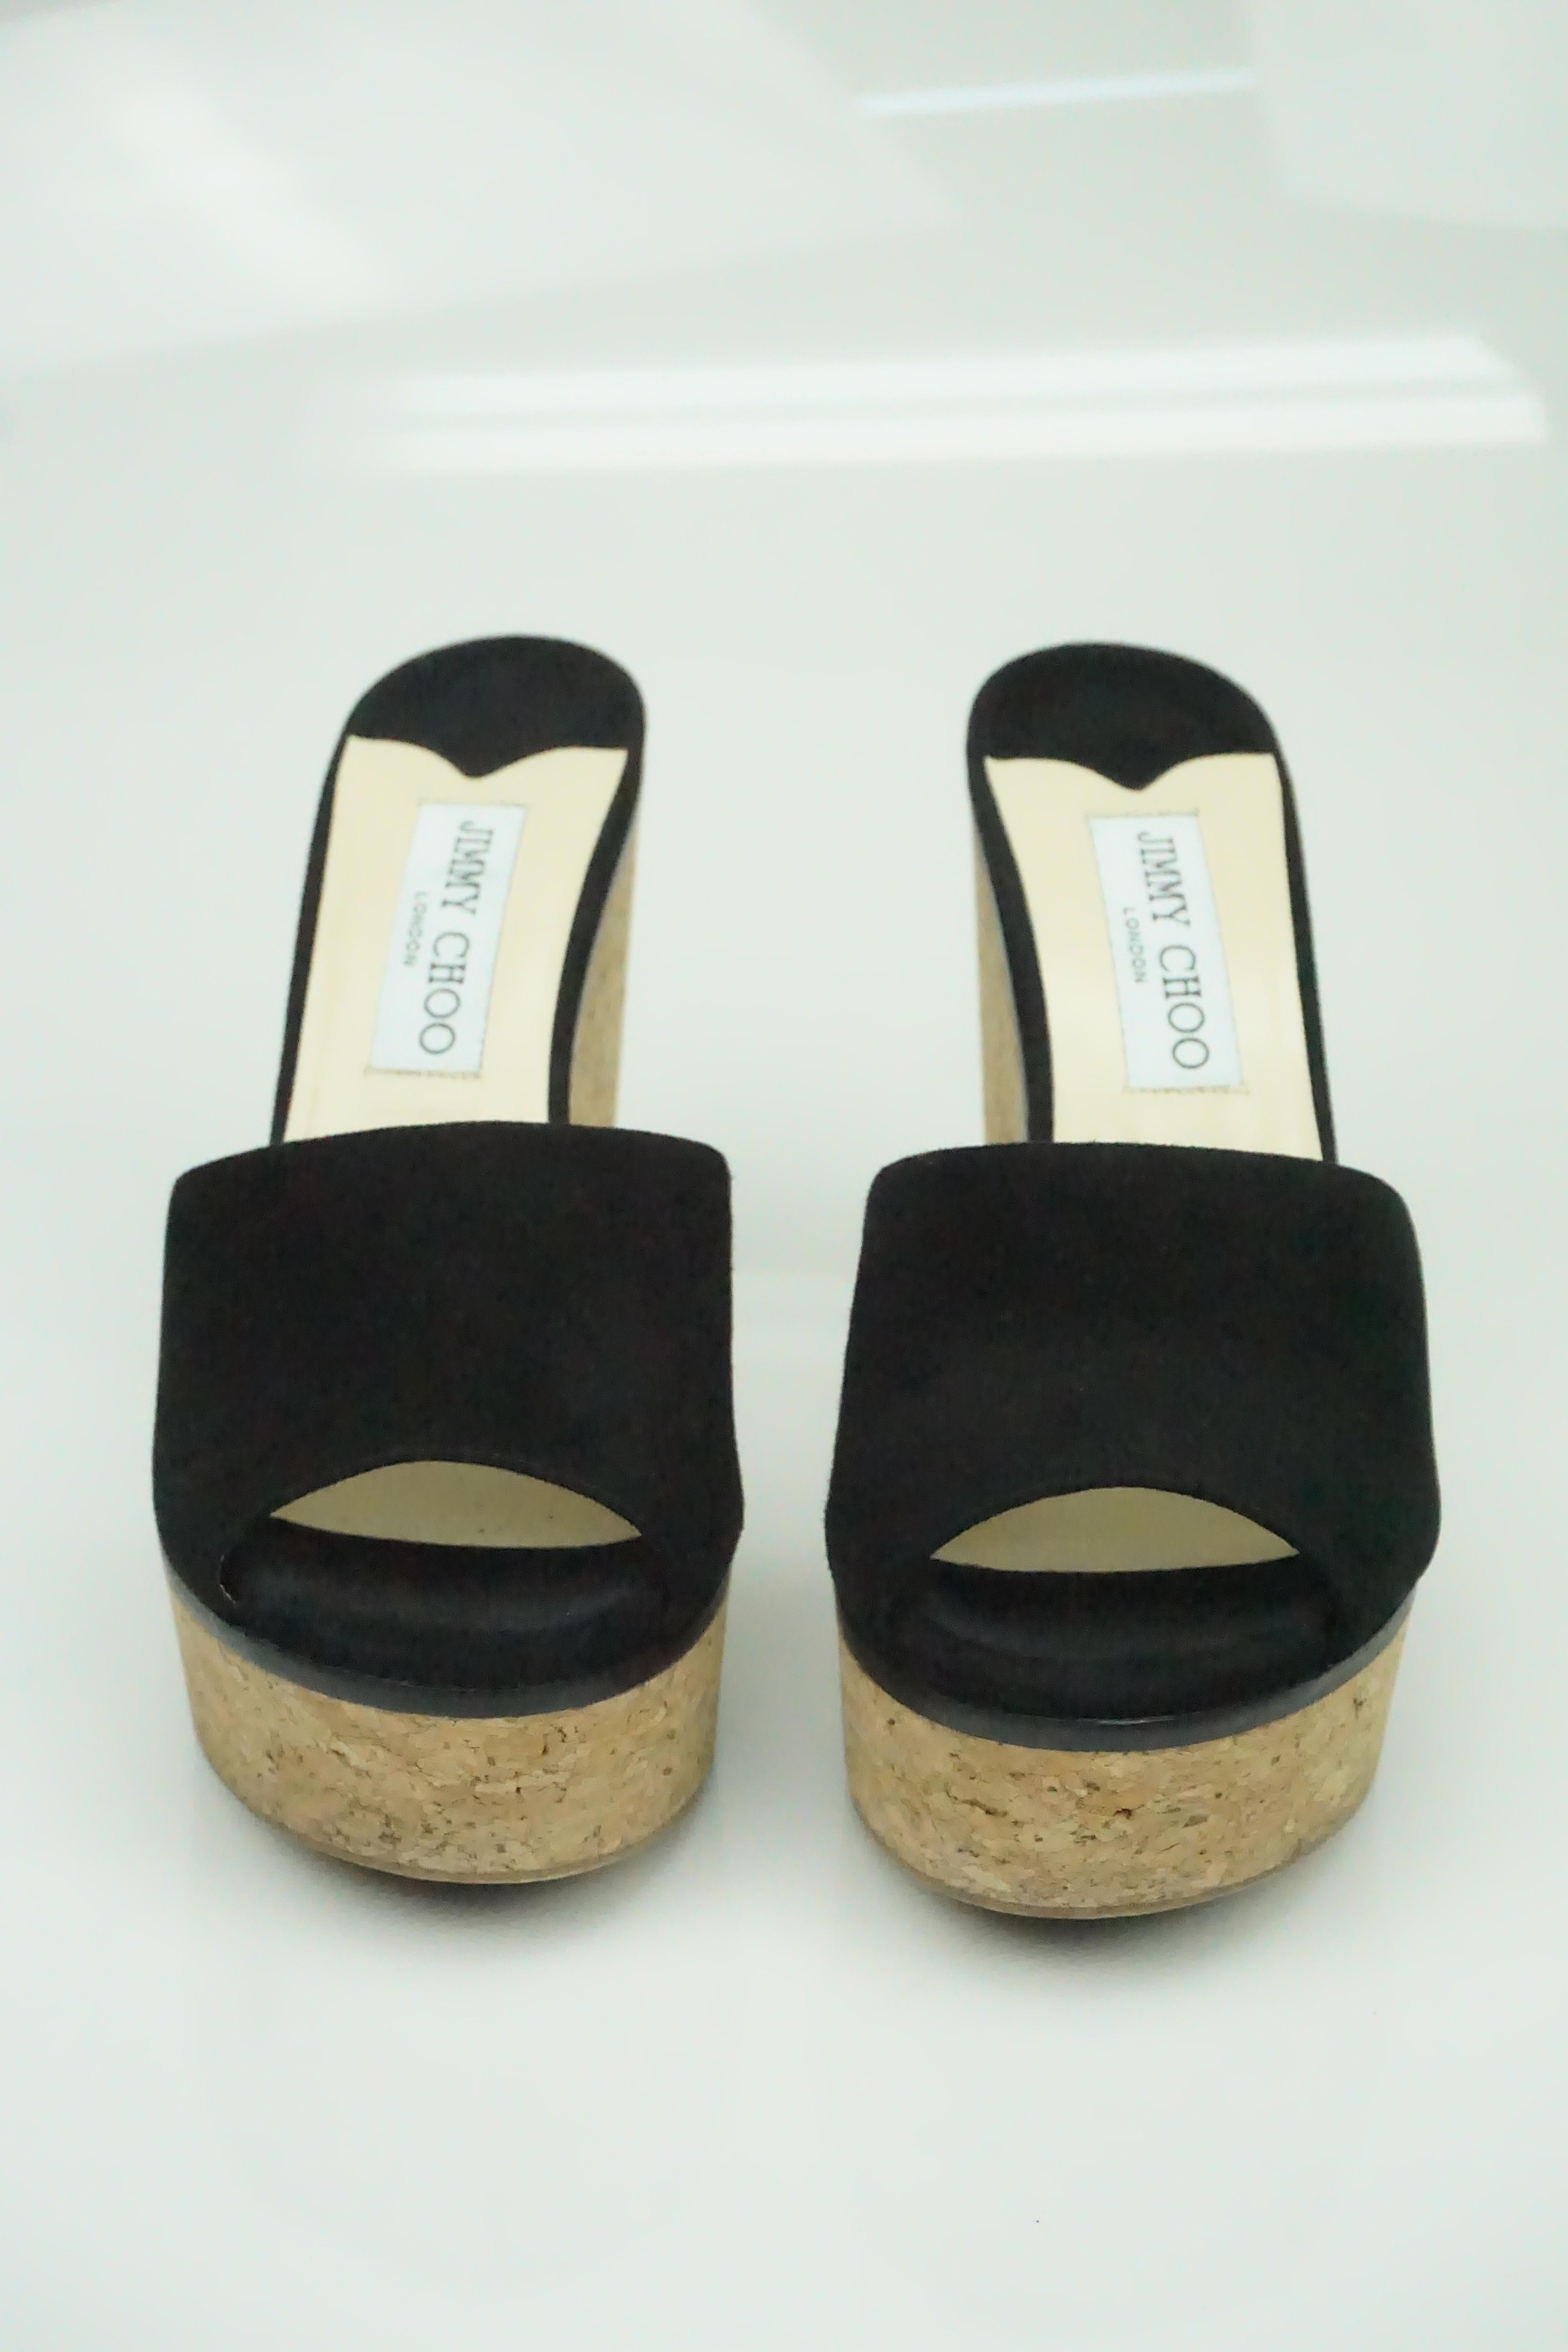 Jimmy Choo Deedee 125 Black Suede Sandal Wedges  - 38.5  These shoes are in excellent condition. The heel is made of a cork material and the lining on the top of the shoe is made of black suede as well as the foot strap. There is a gold detail on